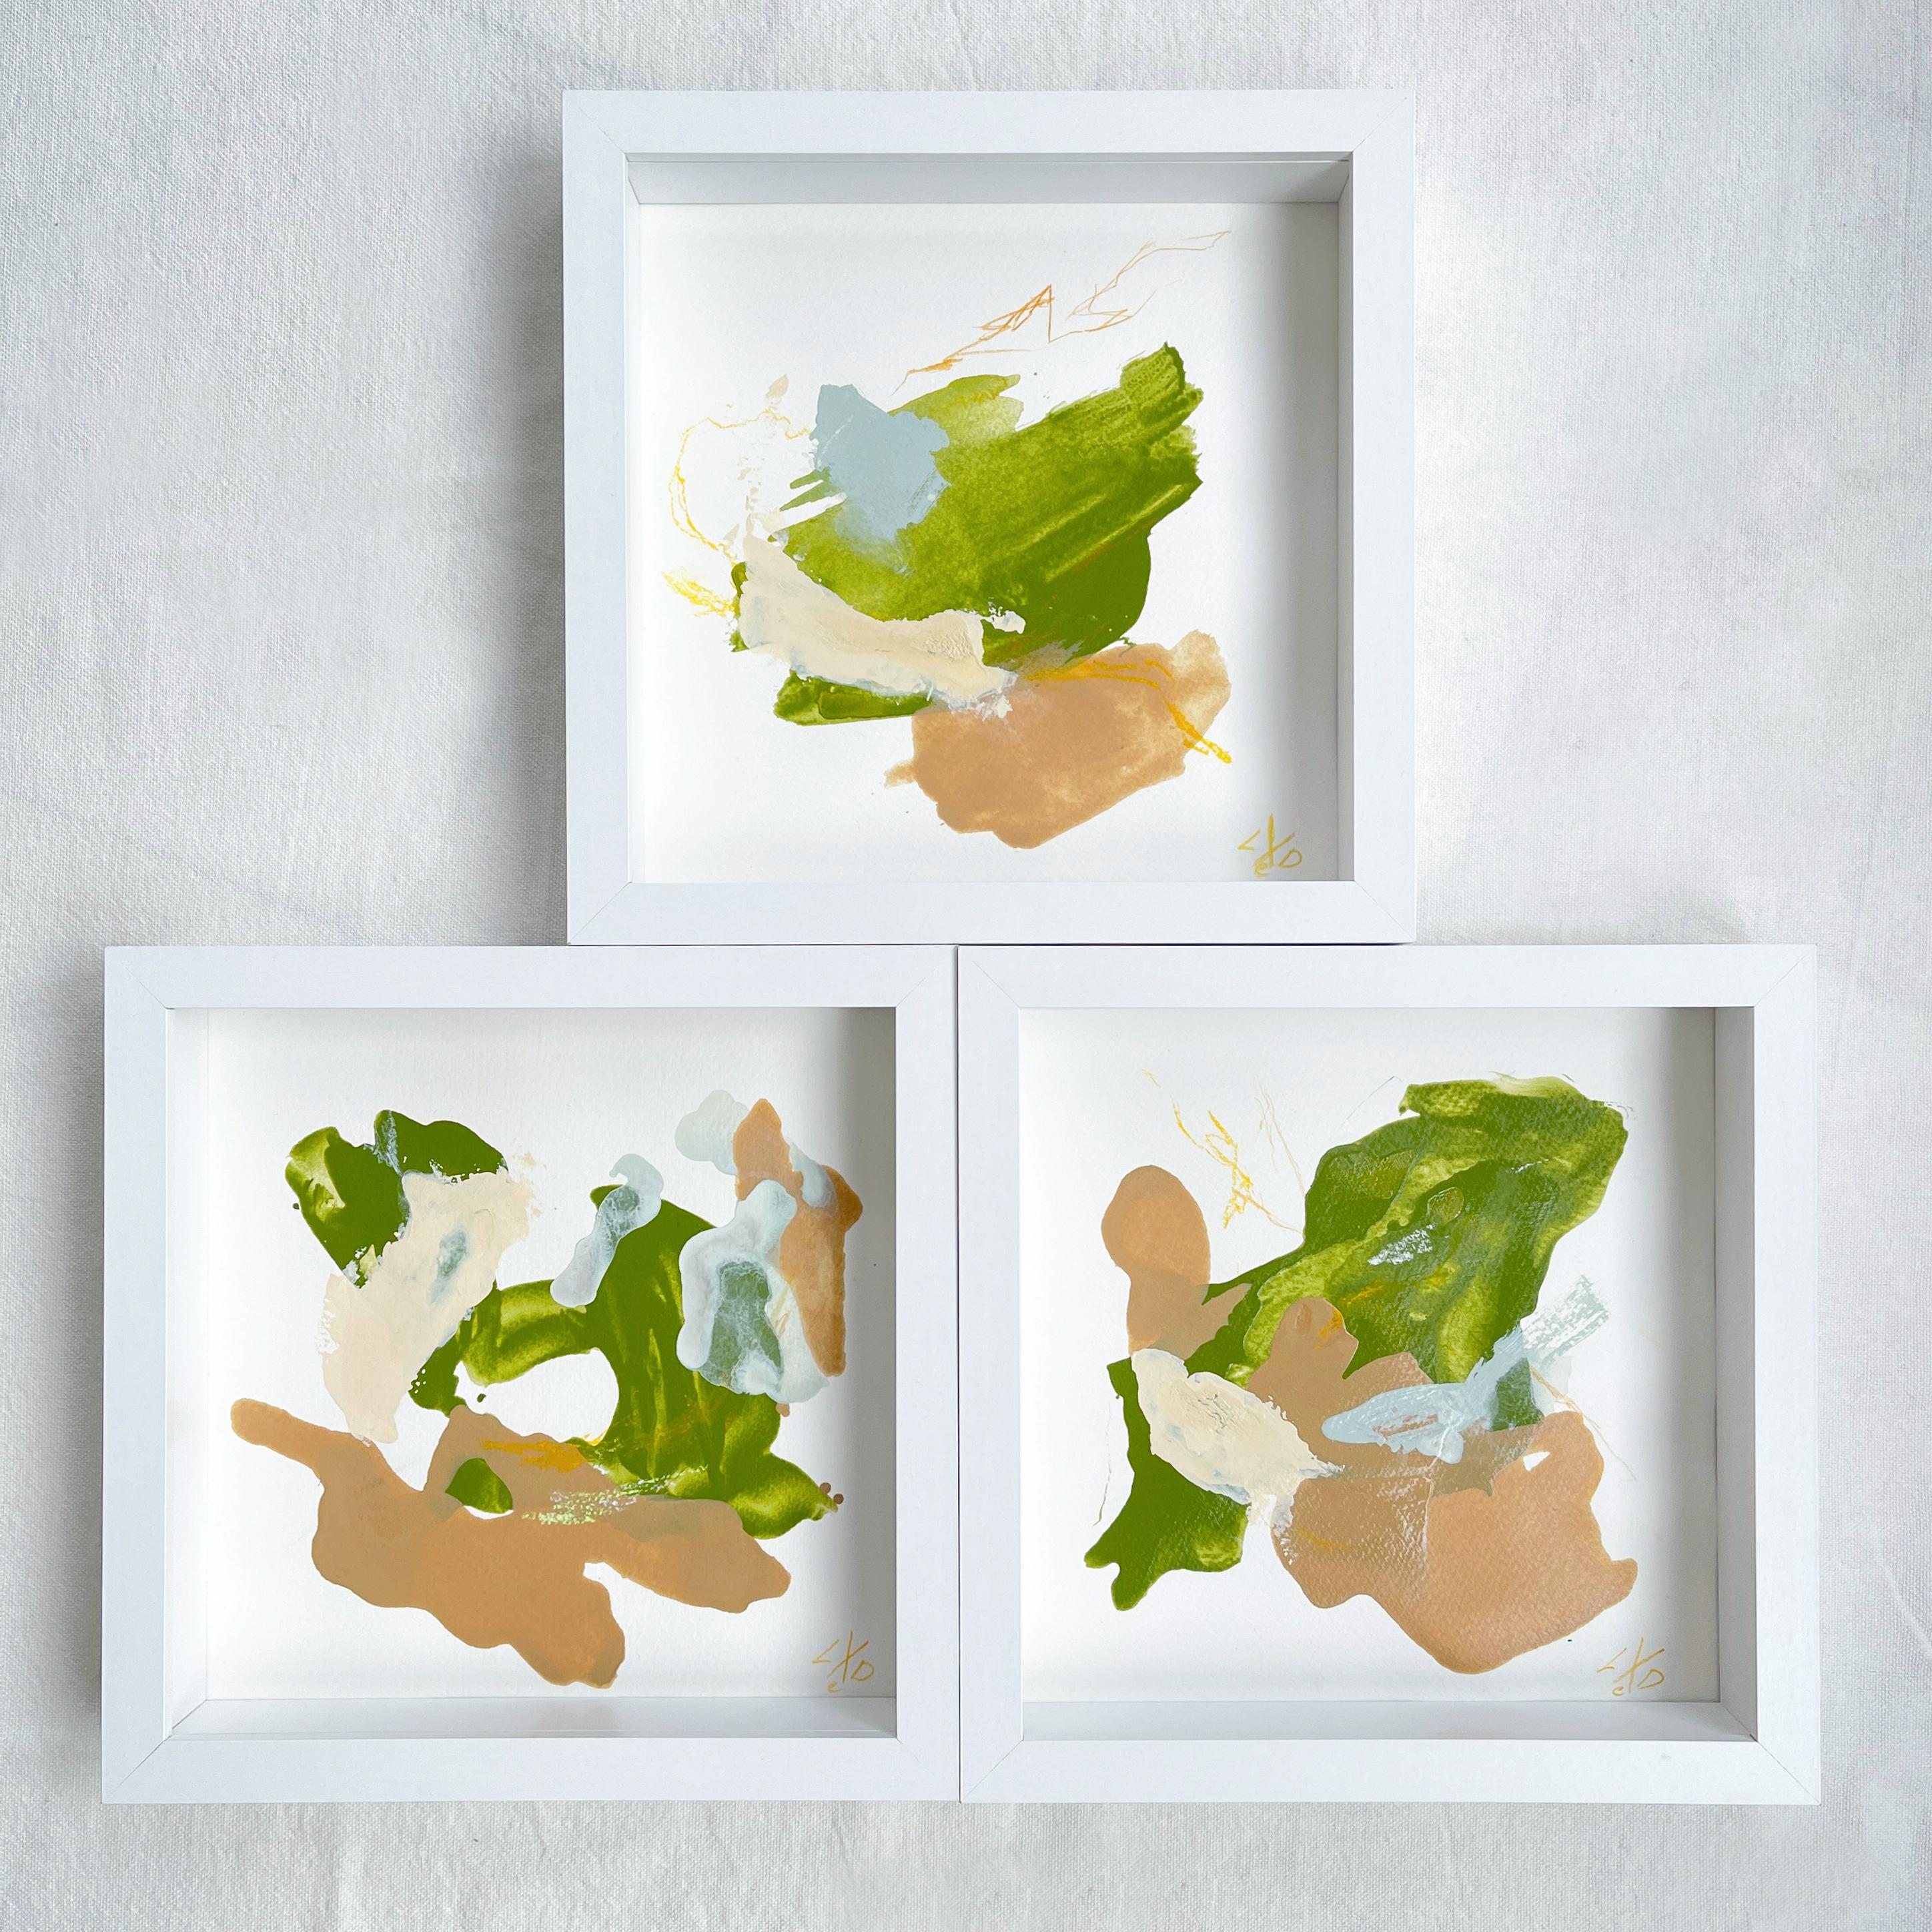 Lesia Danilina Interior Painting - Triptych "Fundamentality" abstract, green, brown, beige, miniature